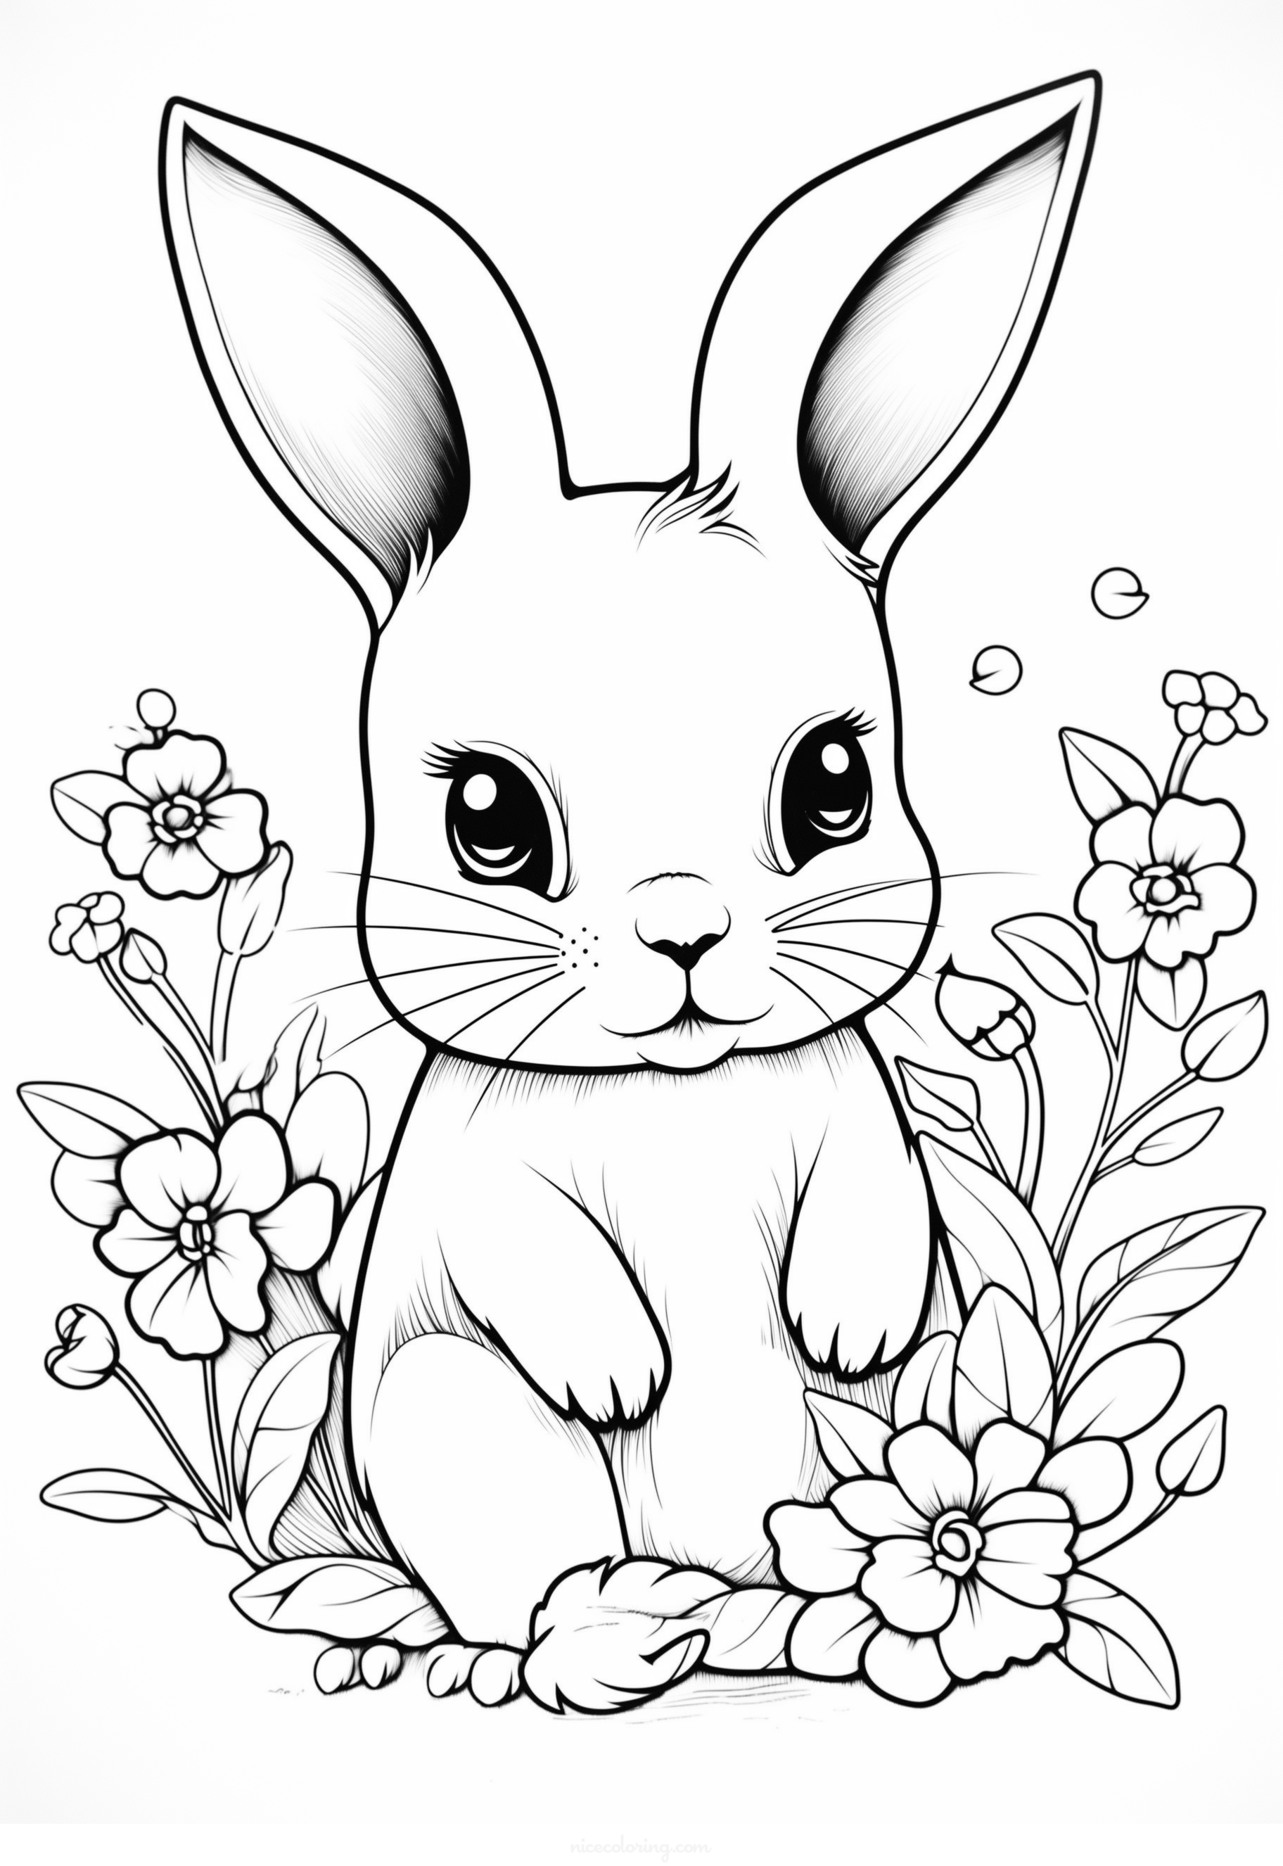 A joyful rabbit surrounded by a variety of flowers coloring page